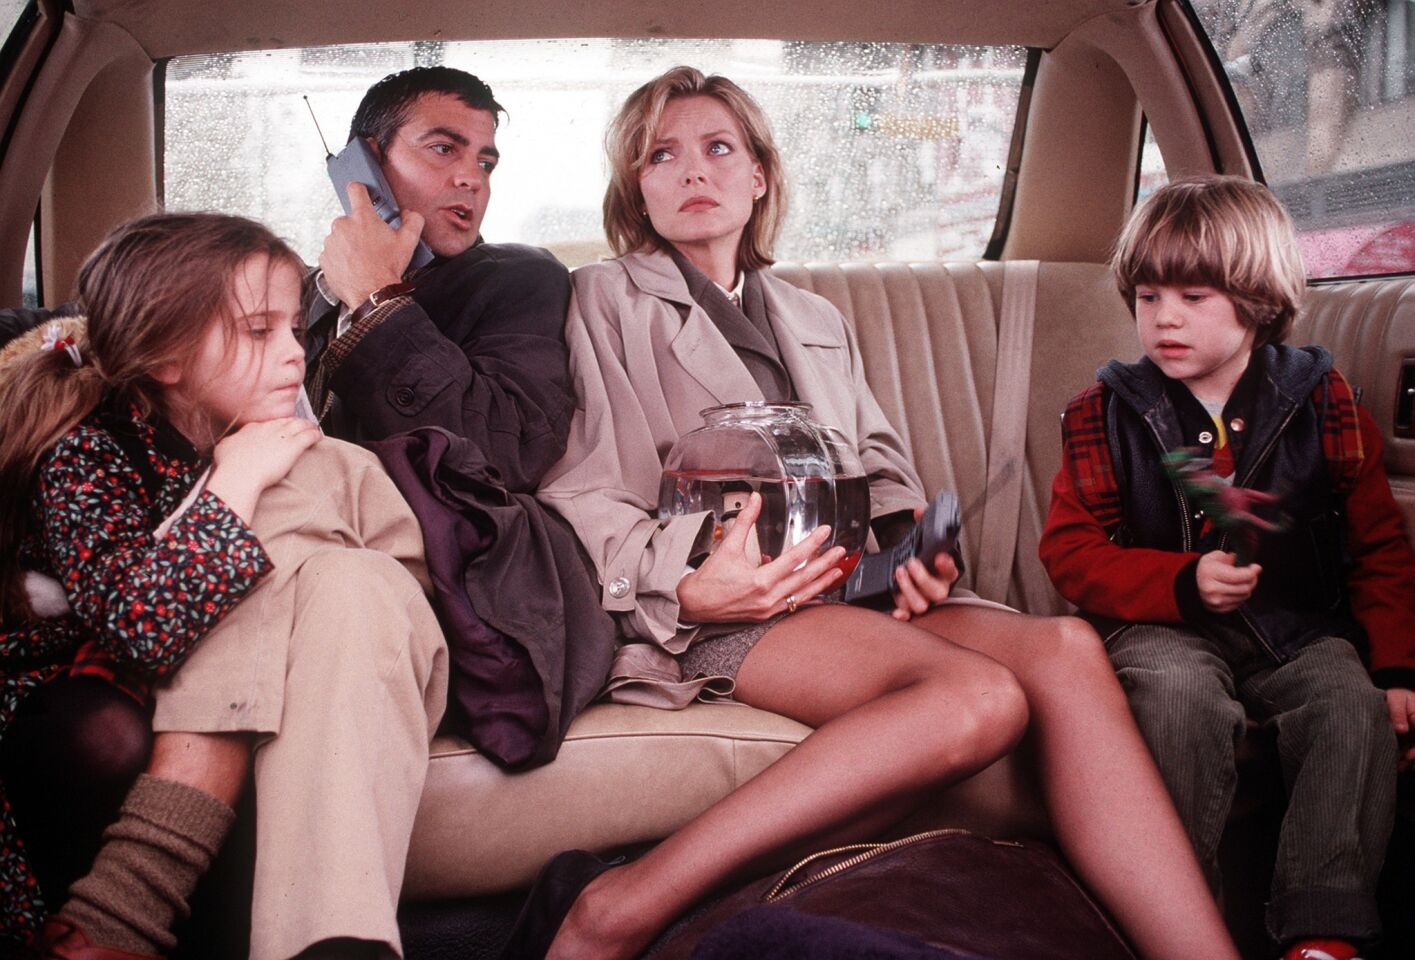 Clooney then starred in a comedy chronicling two single working parents (Michelle Pfeiffer and Clooney) and their children, who encounter a day full of surprises.